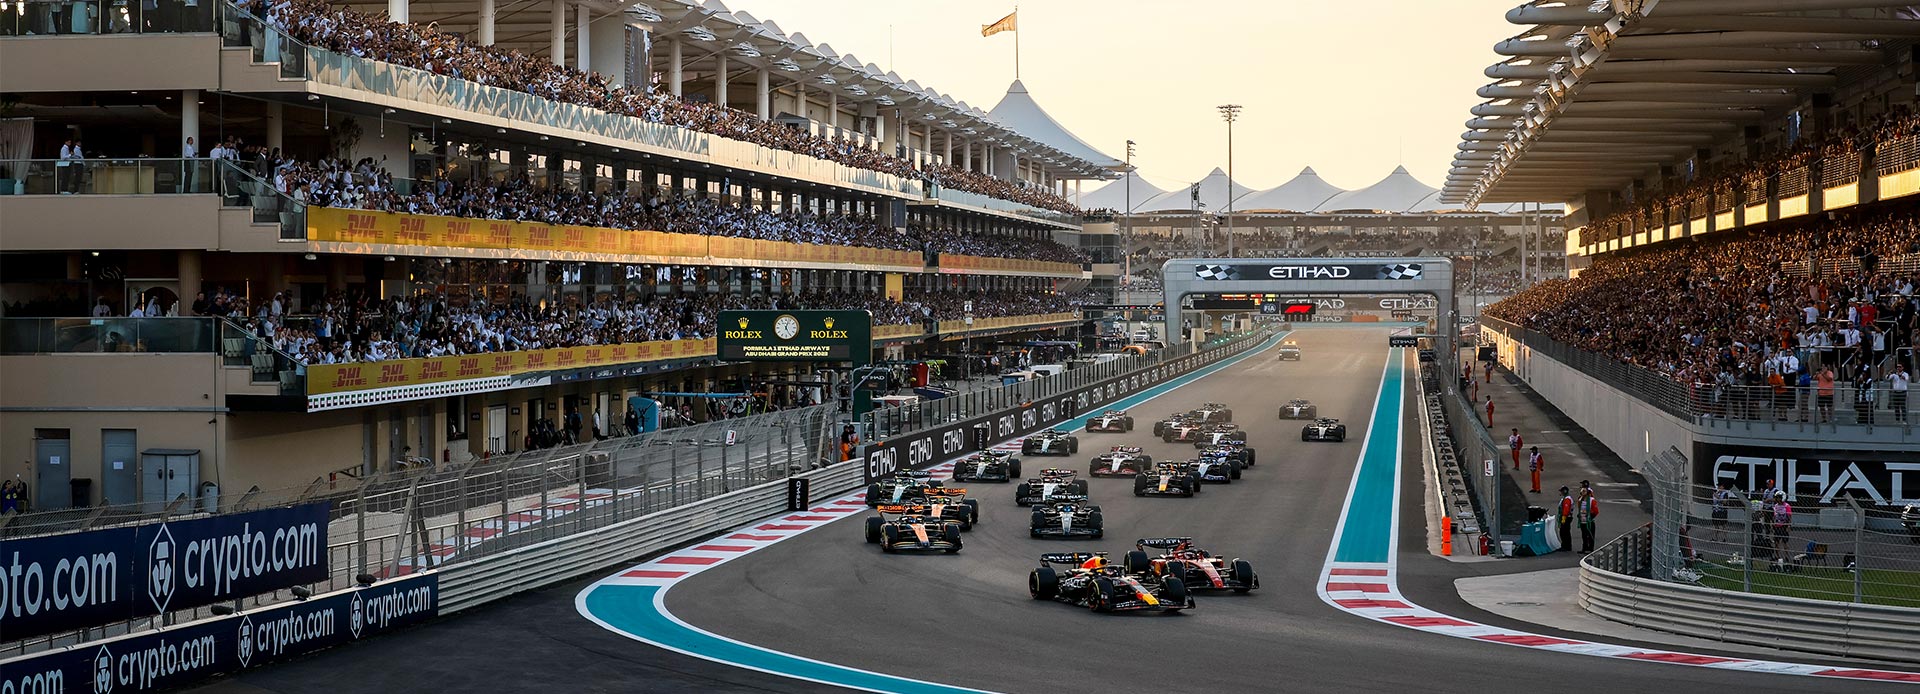 View of cars approaching down the straight during the F1 Abu Dhabi Grand Prix.